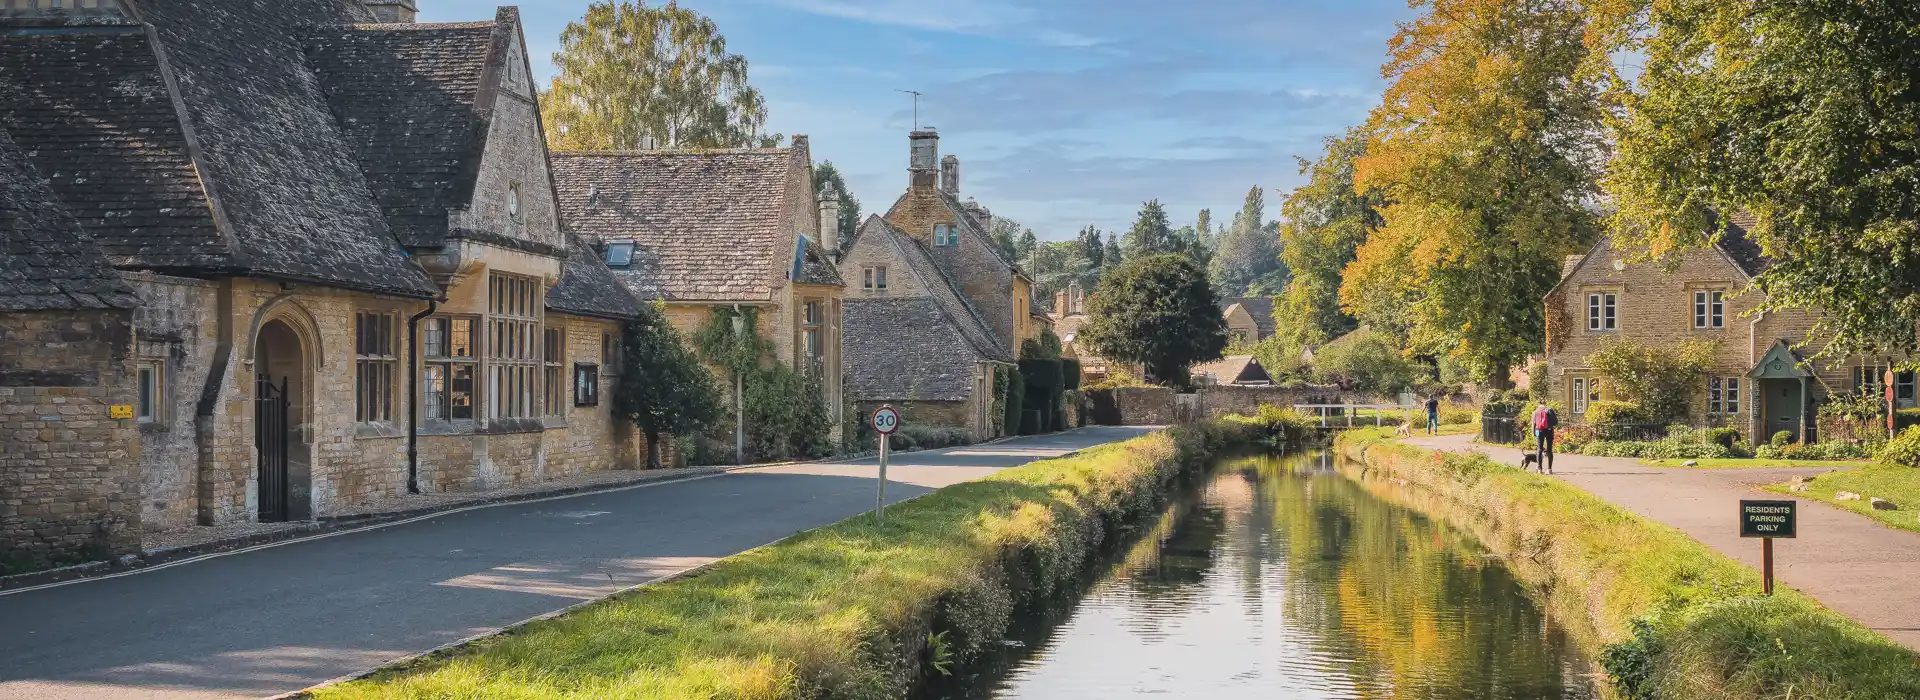 Best campsites in the Cotswolds 